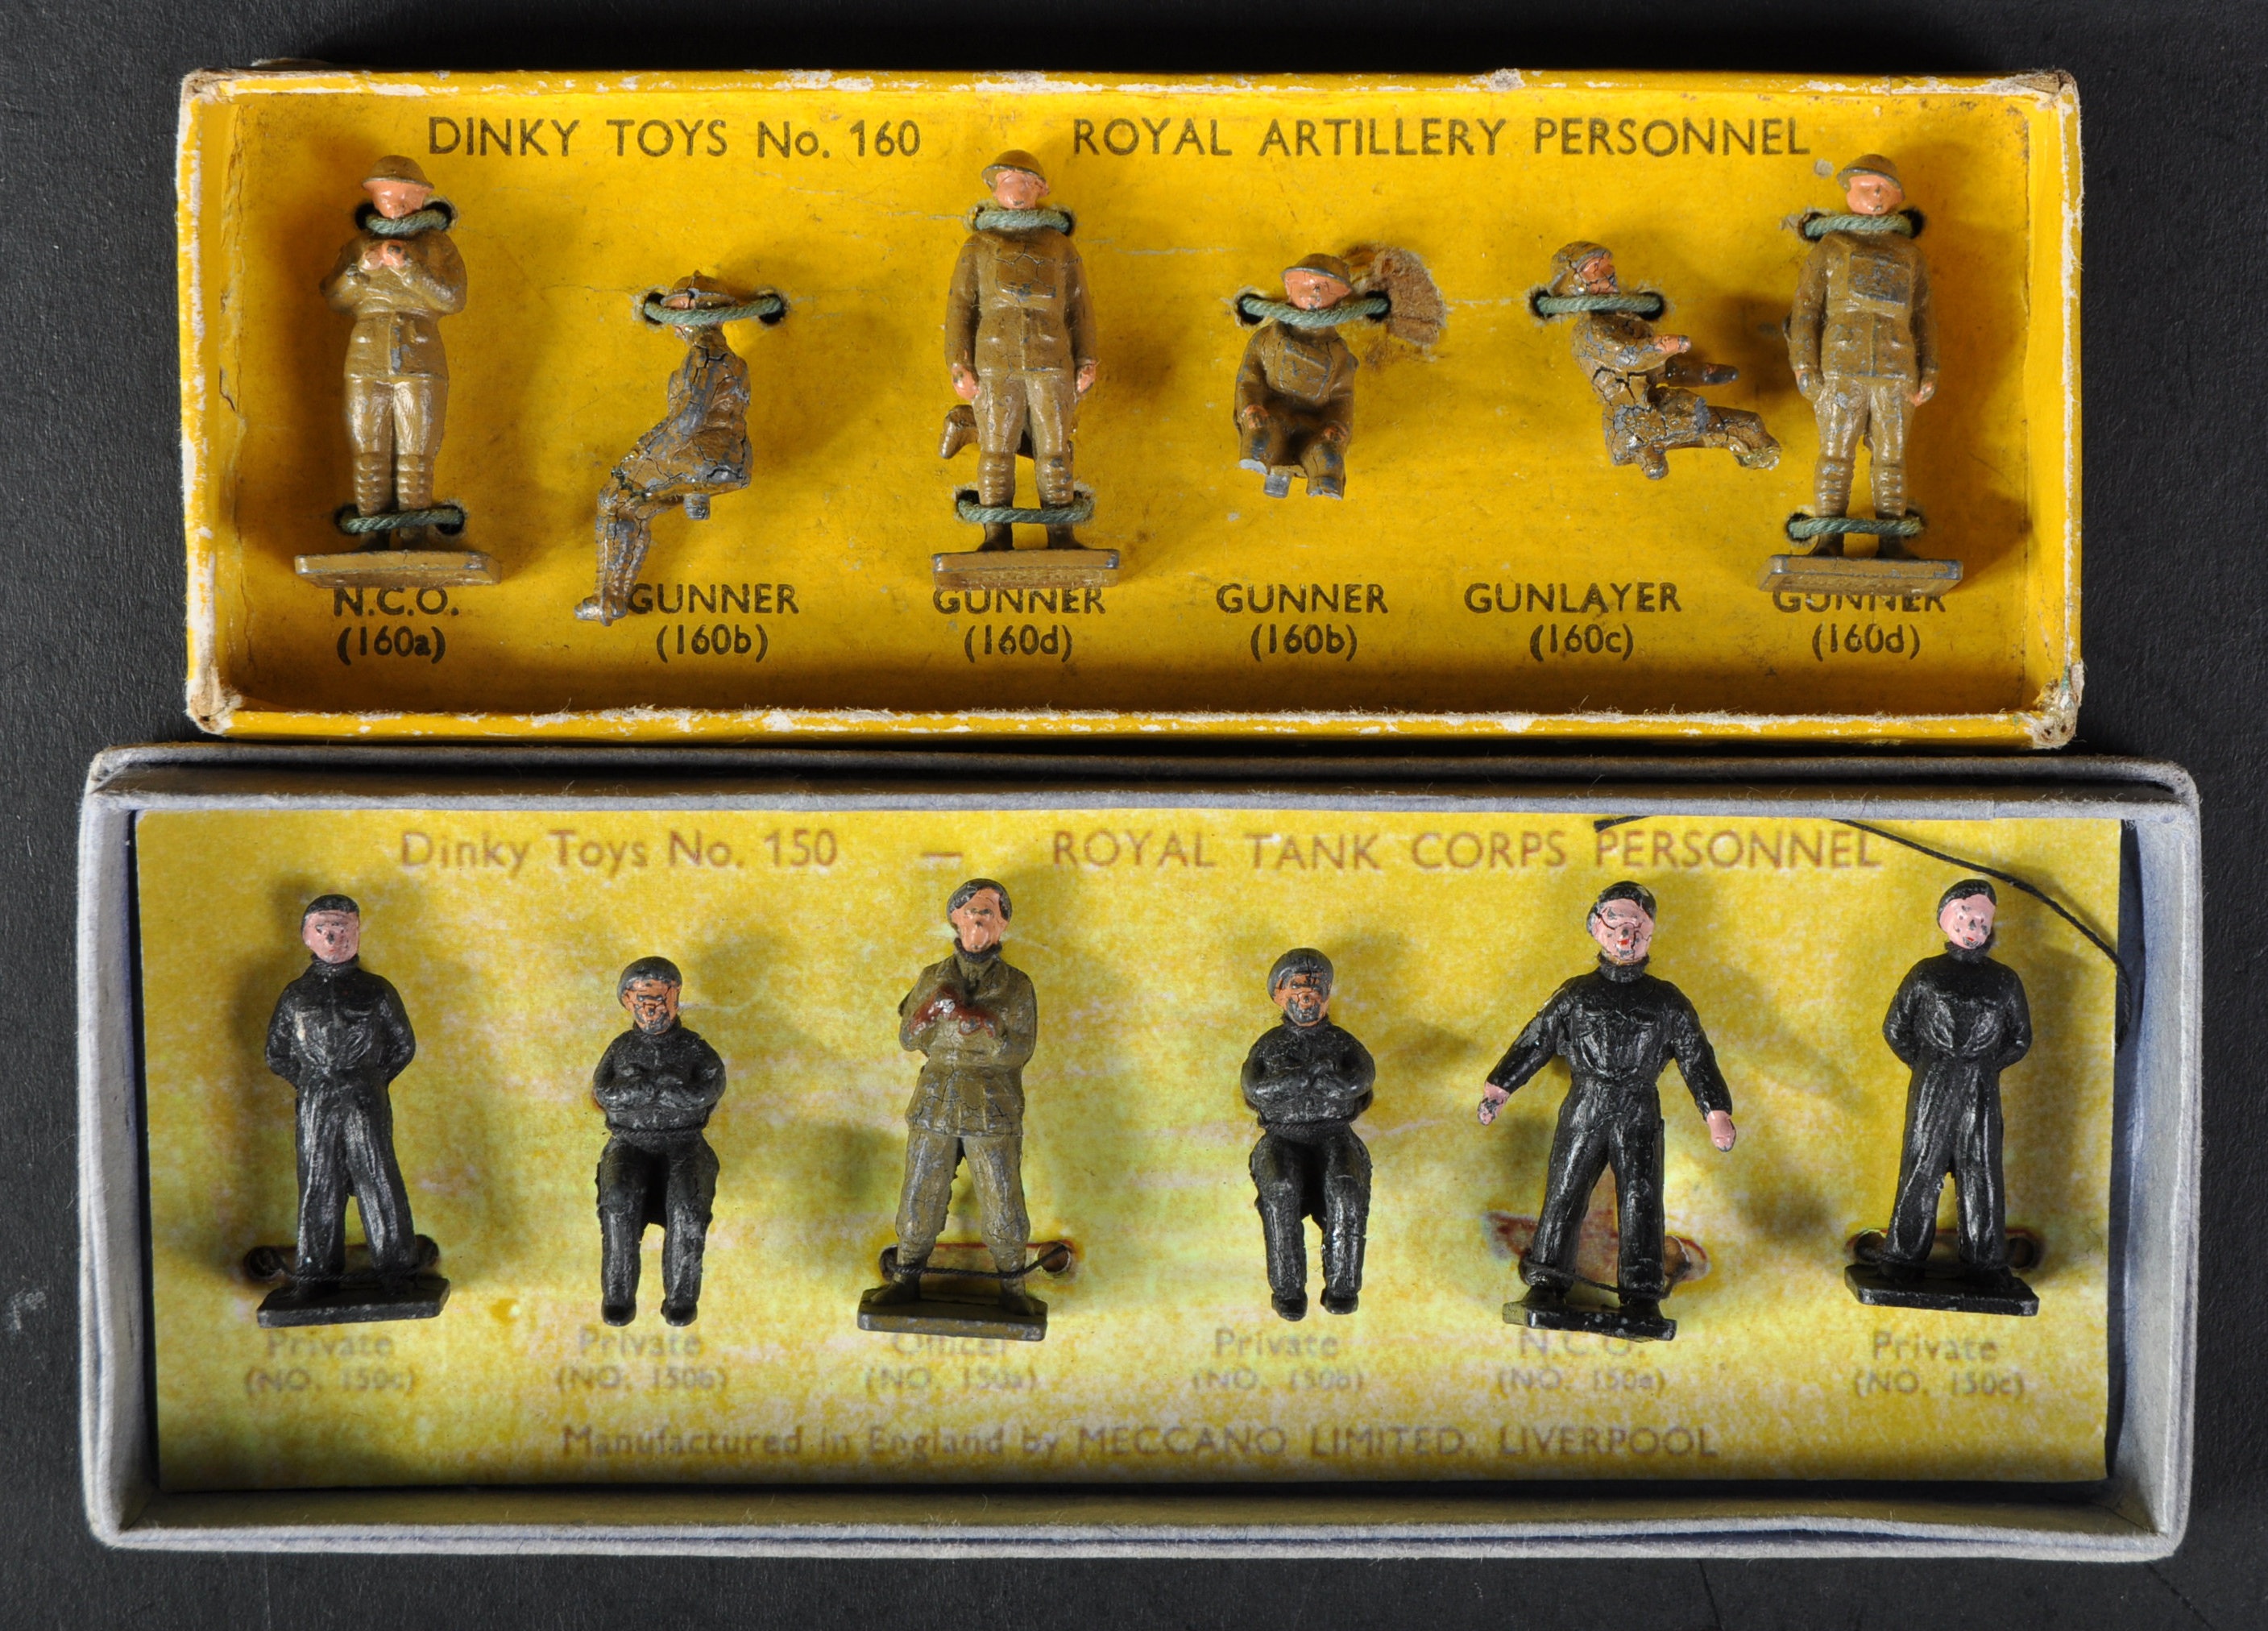 VINTAGE DINKYS TOYS DIECAST MILITARY PERSONNEL FIGURES